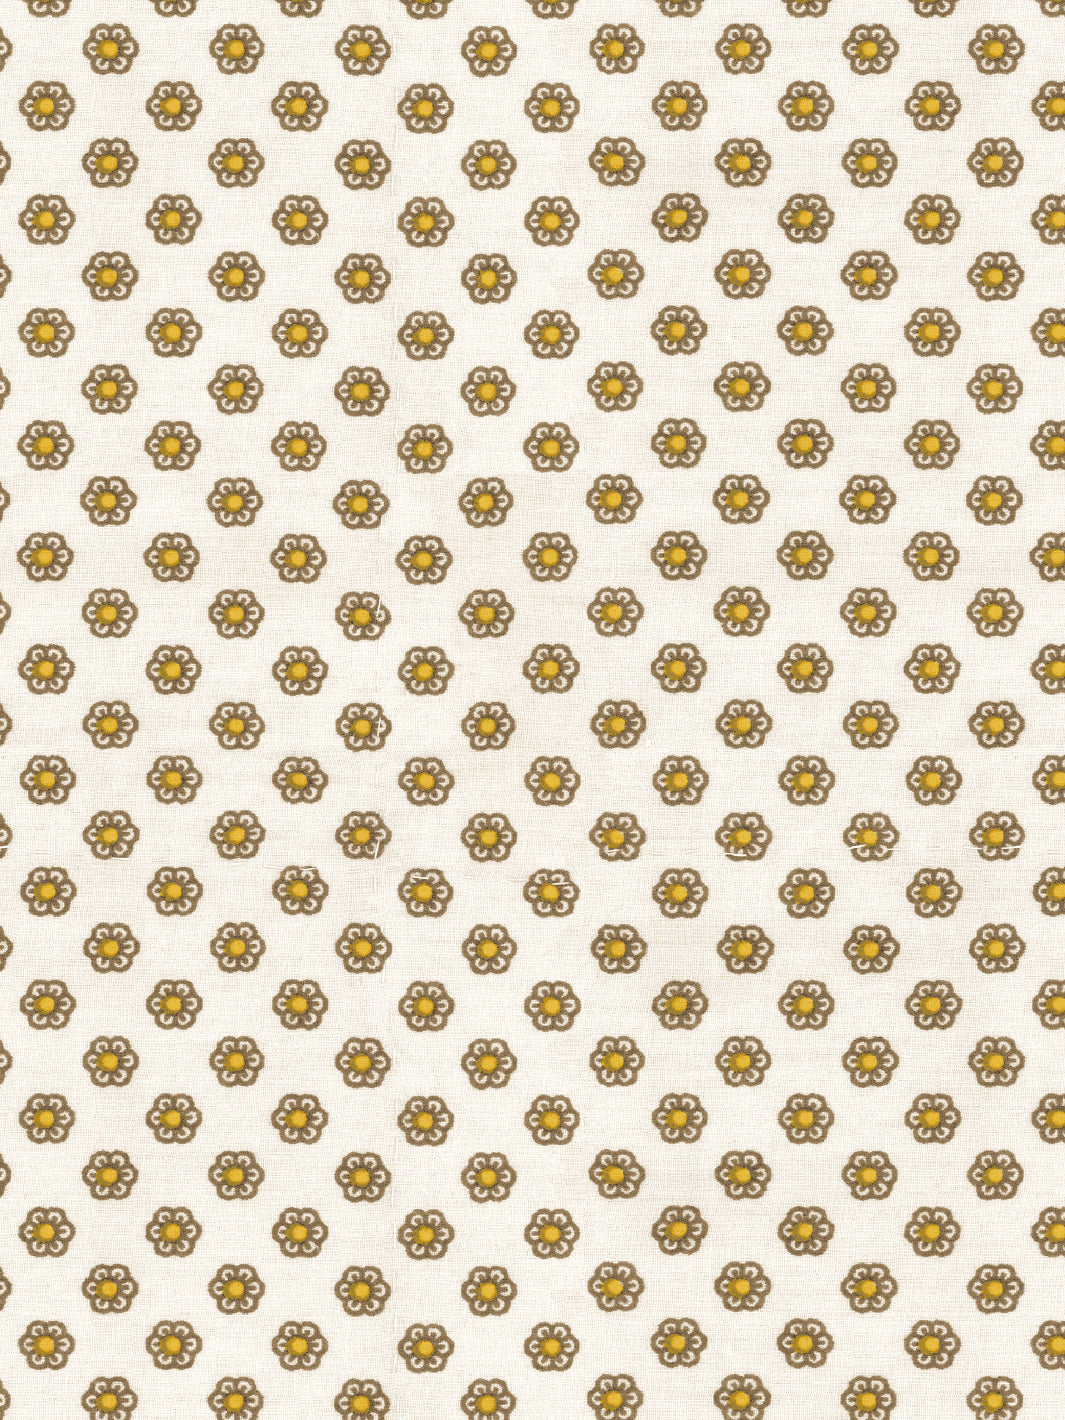 'Ditsy Flower' Wallpaper by Chris Benz - Gold